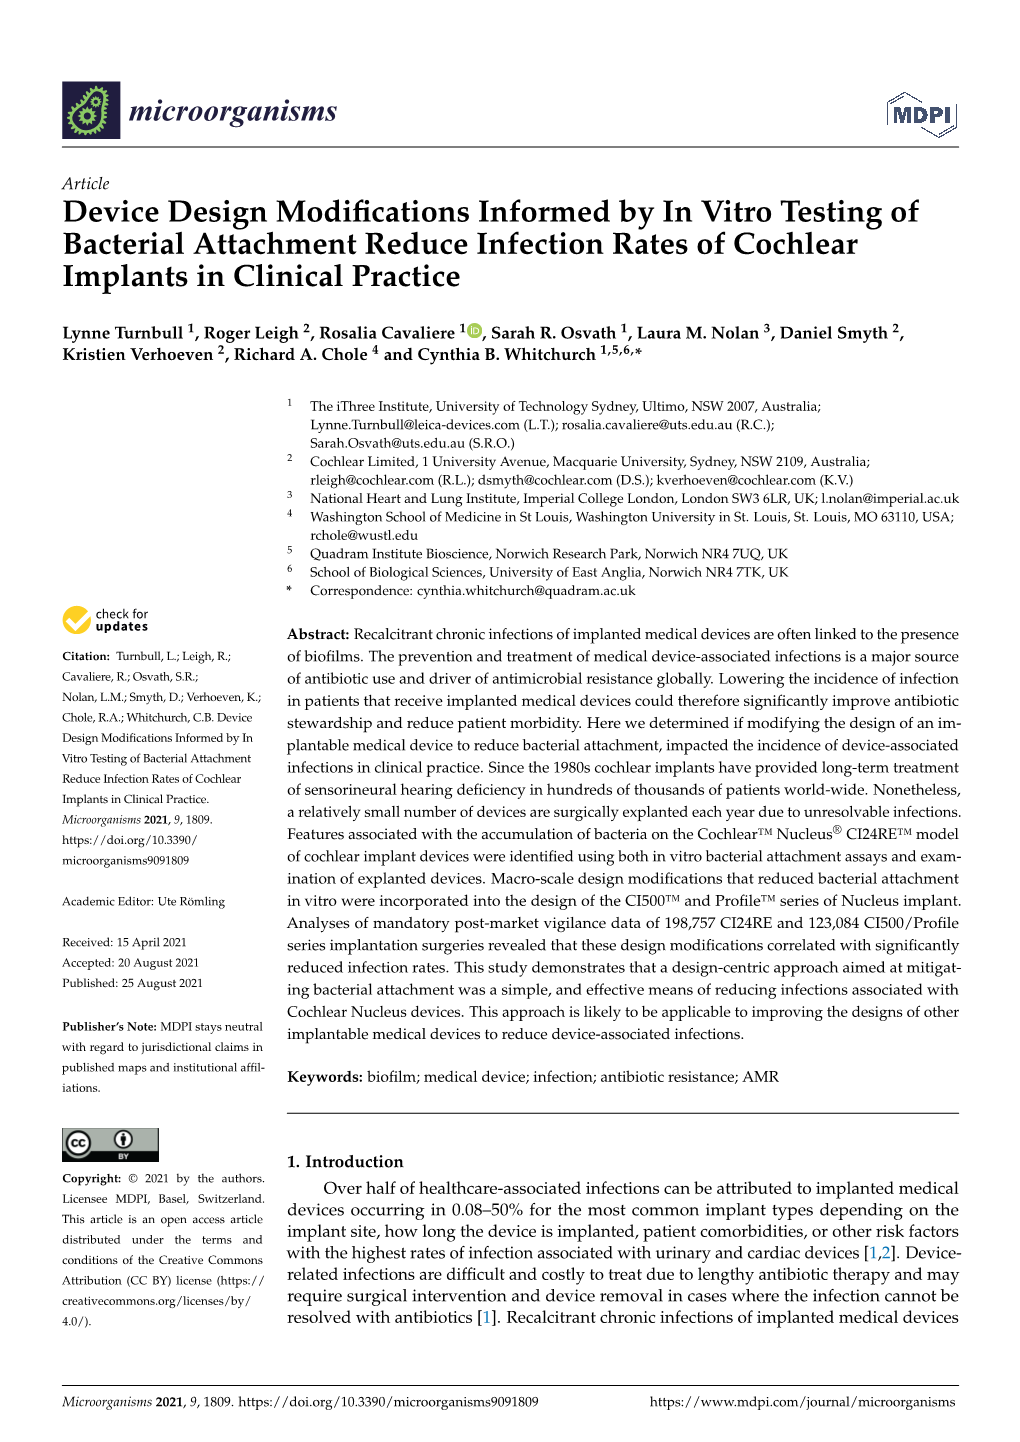 Device Design Modifications Informed by in Vitro Testing of Bacterial Attachment Reduce Infection Rates of Cochlear Implants In